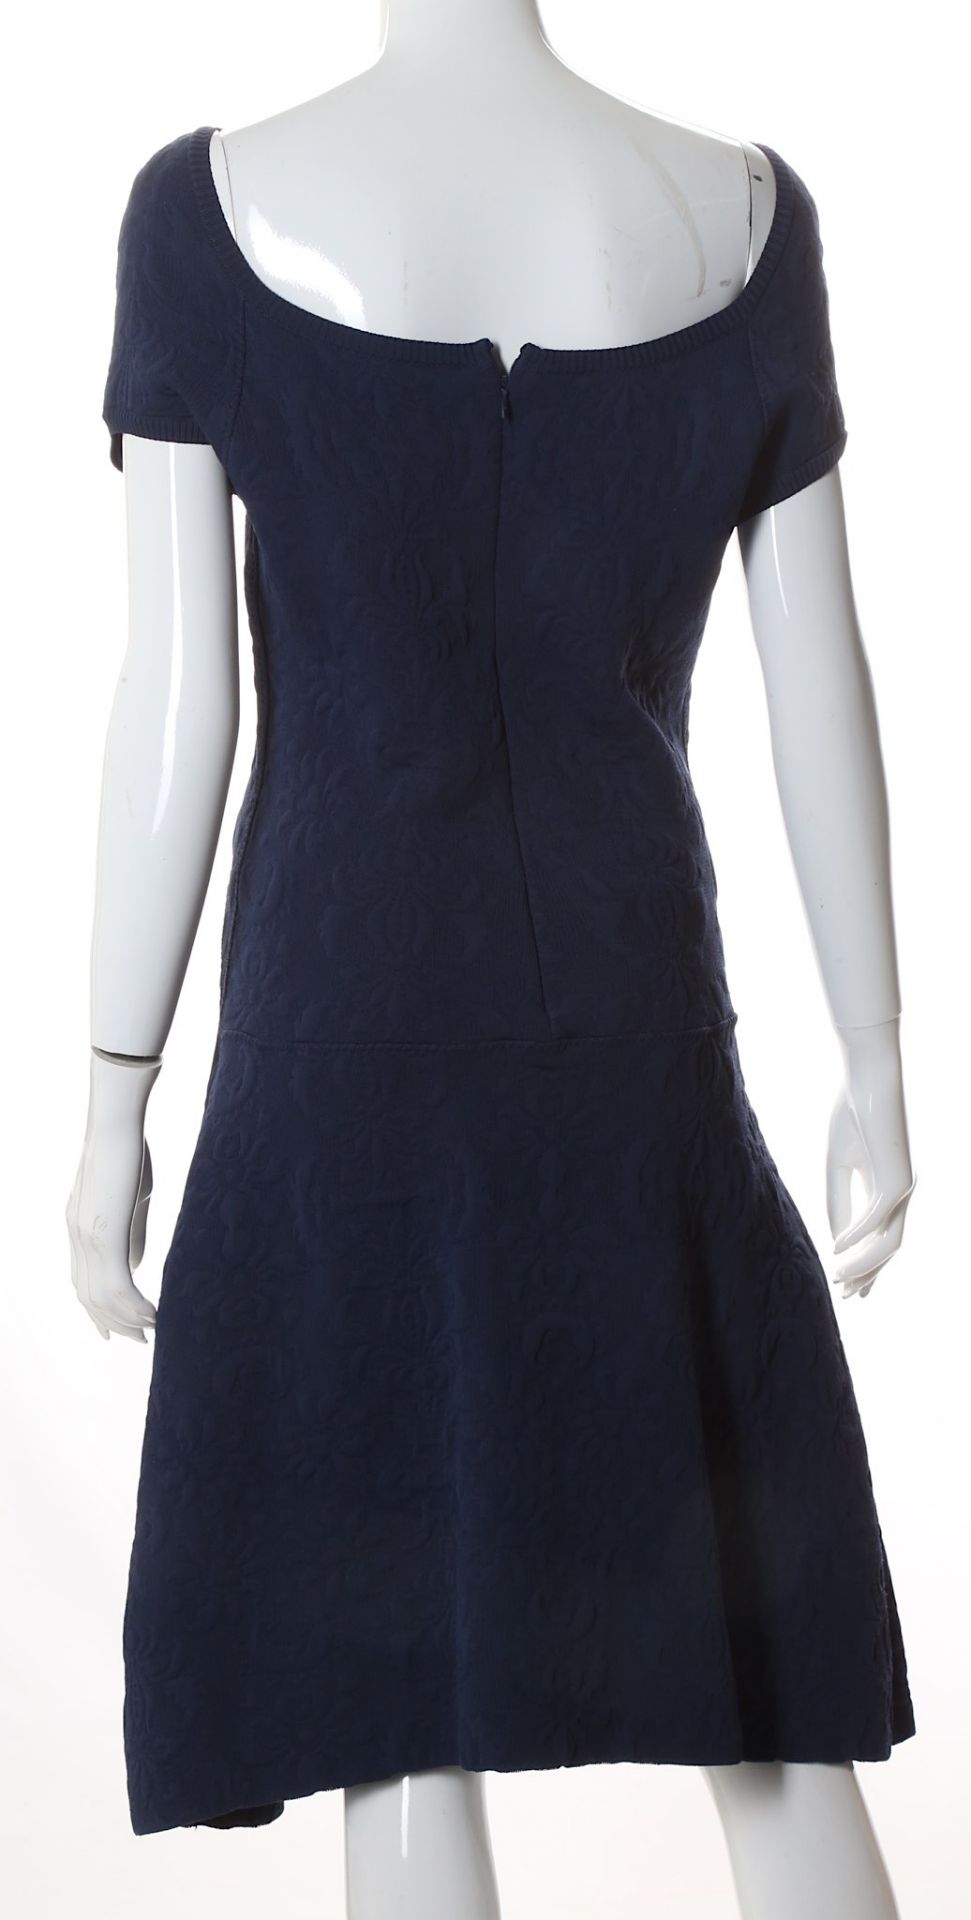 Chanel Navy Blue Jacket and Dress, 2010s, raised b - Image 6 of 7